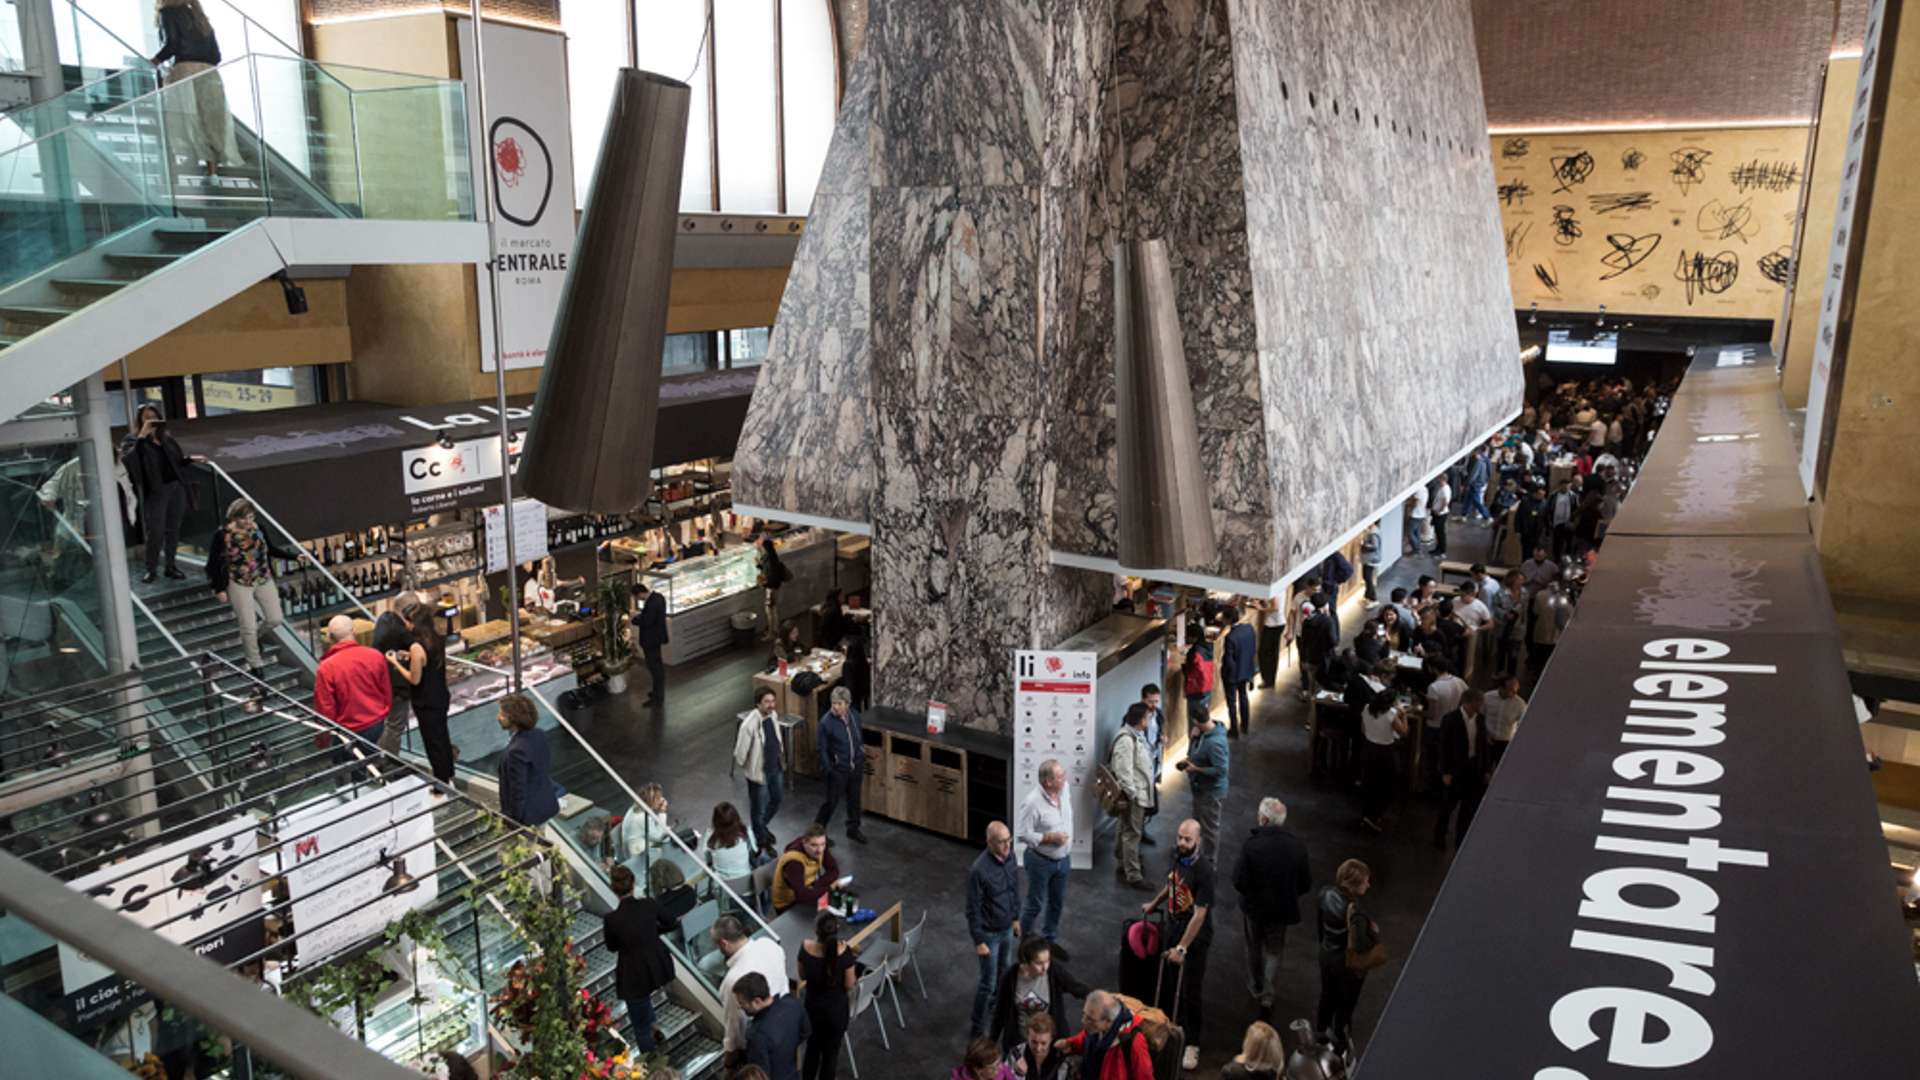 Italy's Legendary Mercato Centrale Is Opening Its First International Artisan Market in Australia